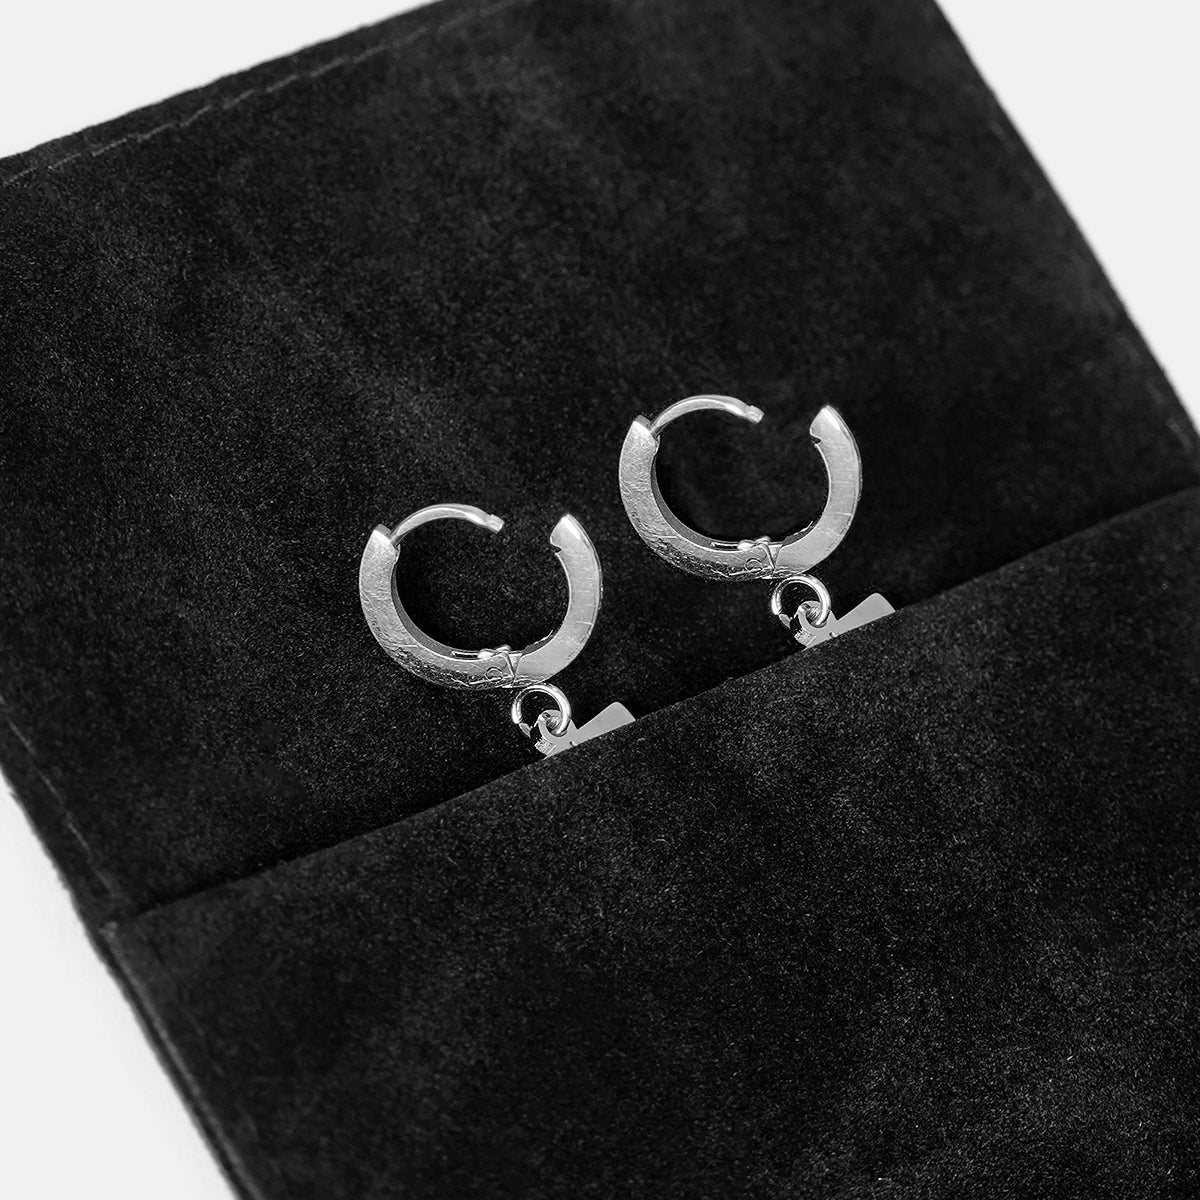 76 Number Earring - Stainless Steel